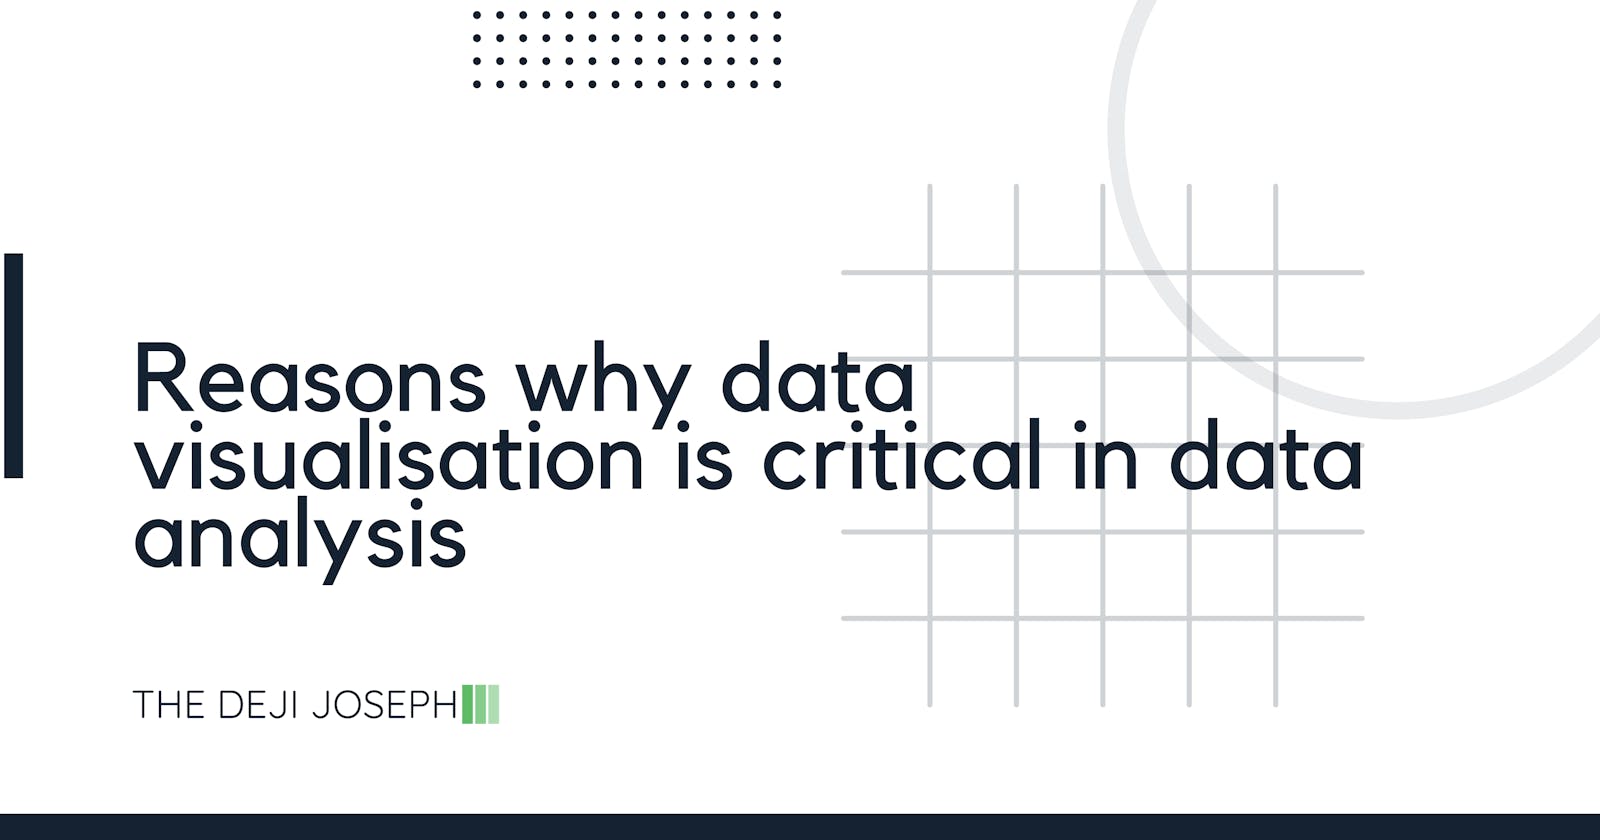 Reasons Why Data Visualisation is Critical in Data Analysis